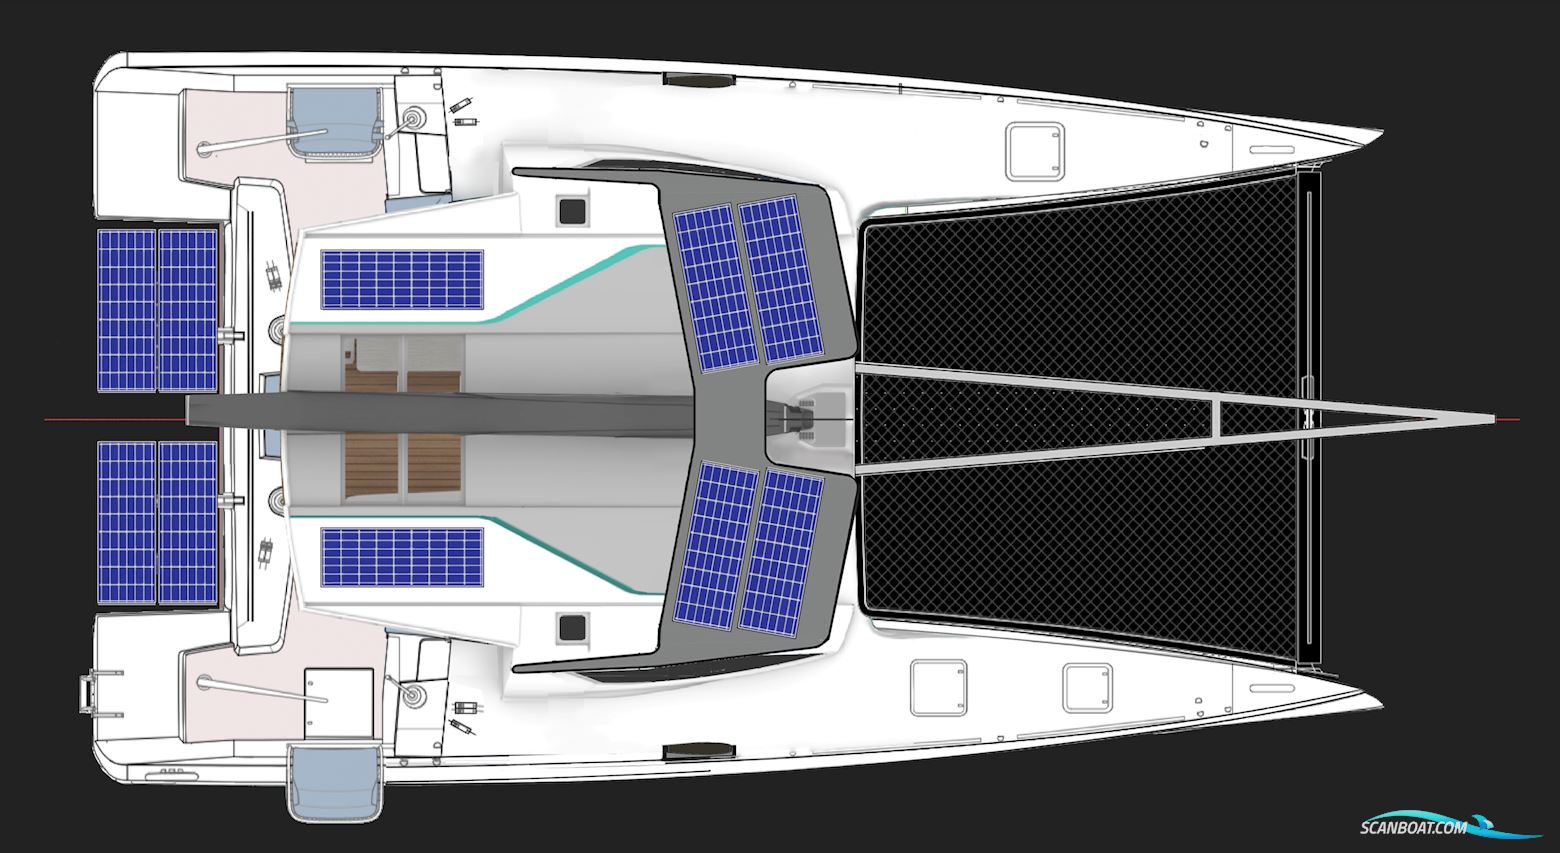 PS36 - Fast Container Ship Catamaran Multi hull boat 2023, with 2 x El. Oceanvolt Set Engine engine, Denmark